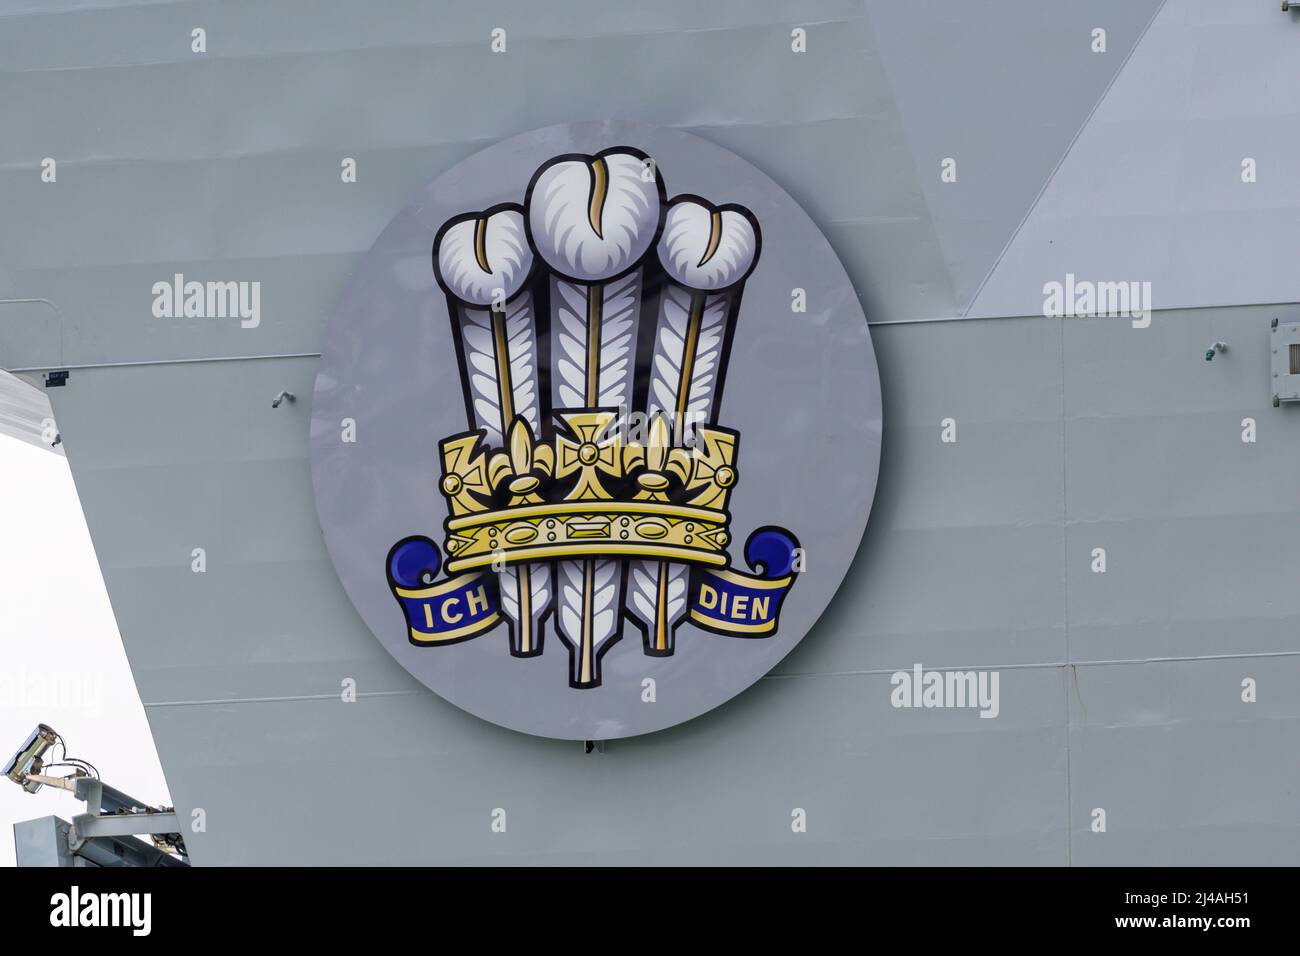 The coat of arms of the Prince of Wales, as worn by the Royal Navy aircraft carrier HMS Prince of Wales (R09) - May 2021. Stock Photo